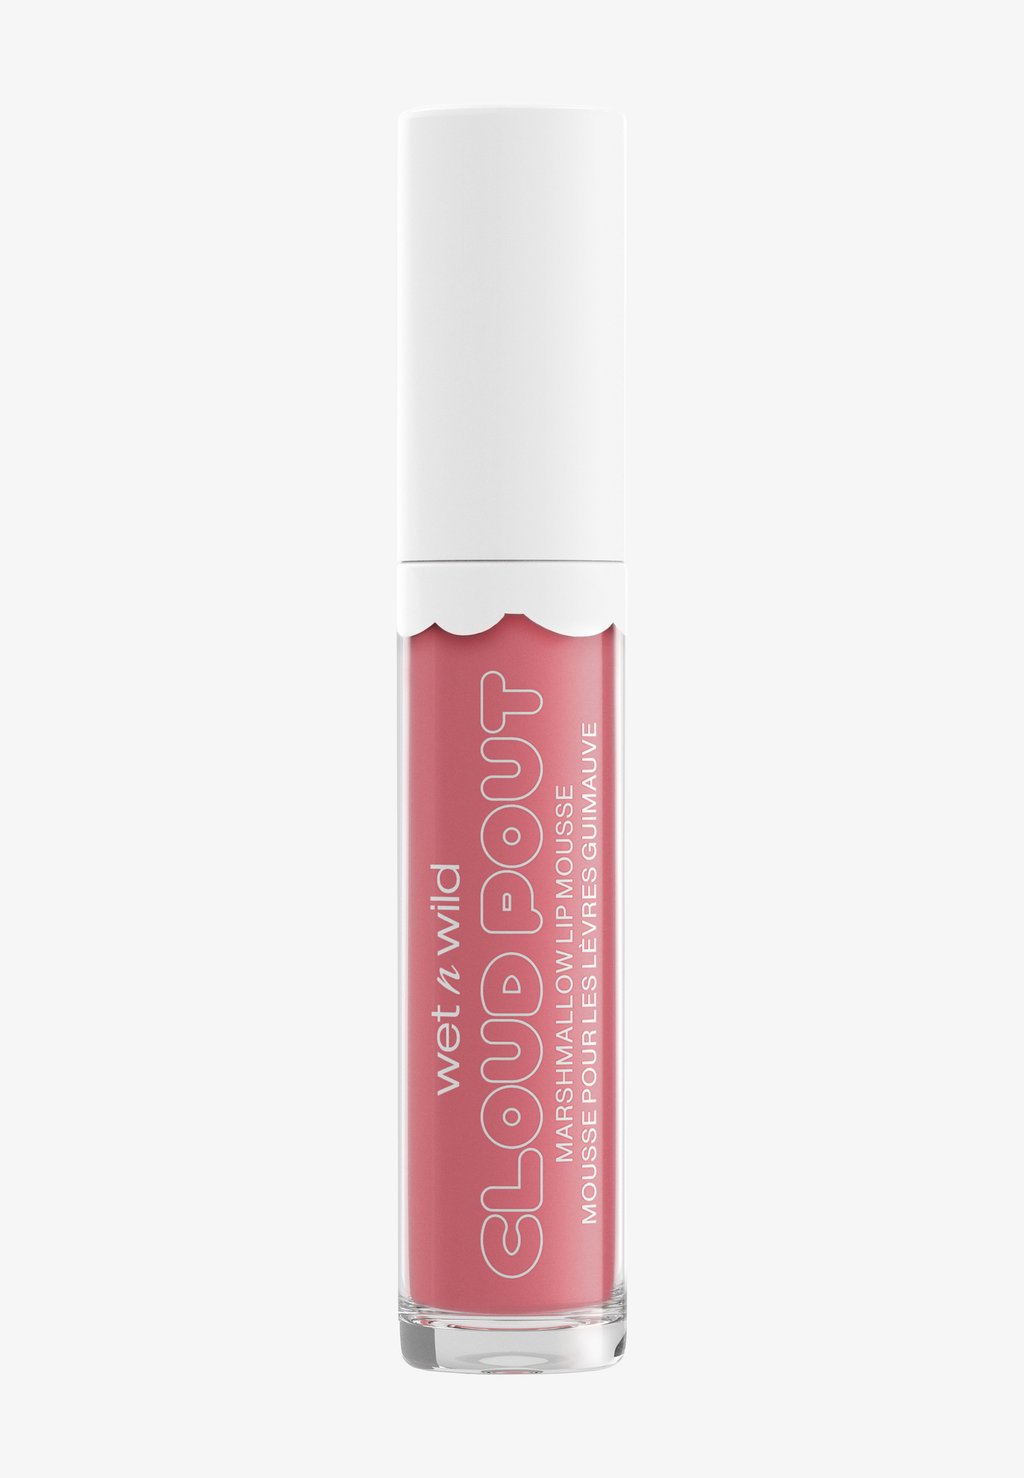 Жидкая помада Cloud Pout Marshmallow Lip Mousse WET N WILD, цвет girl, you're whipped жидкая помада cloud pout marshmallow lip mousse wet n wild цвет girl you re whipped